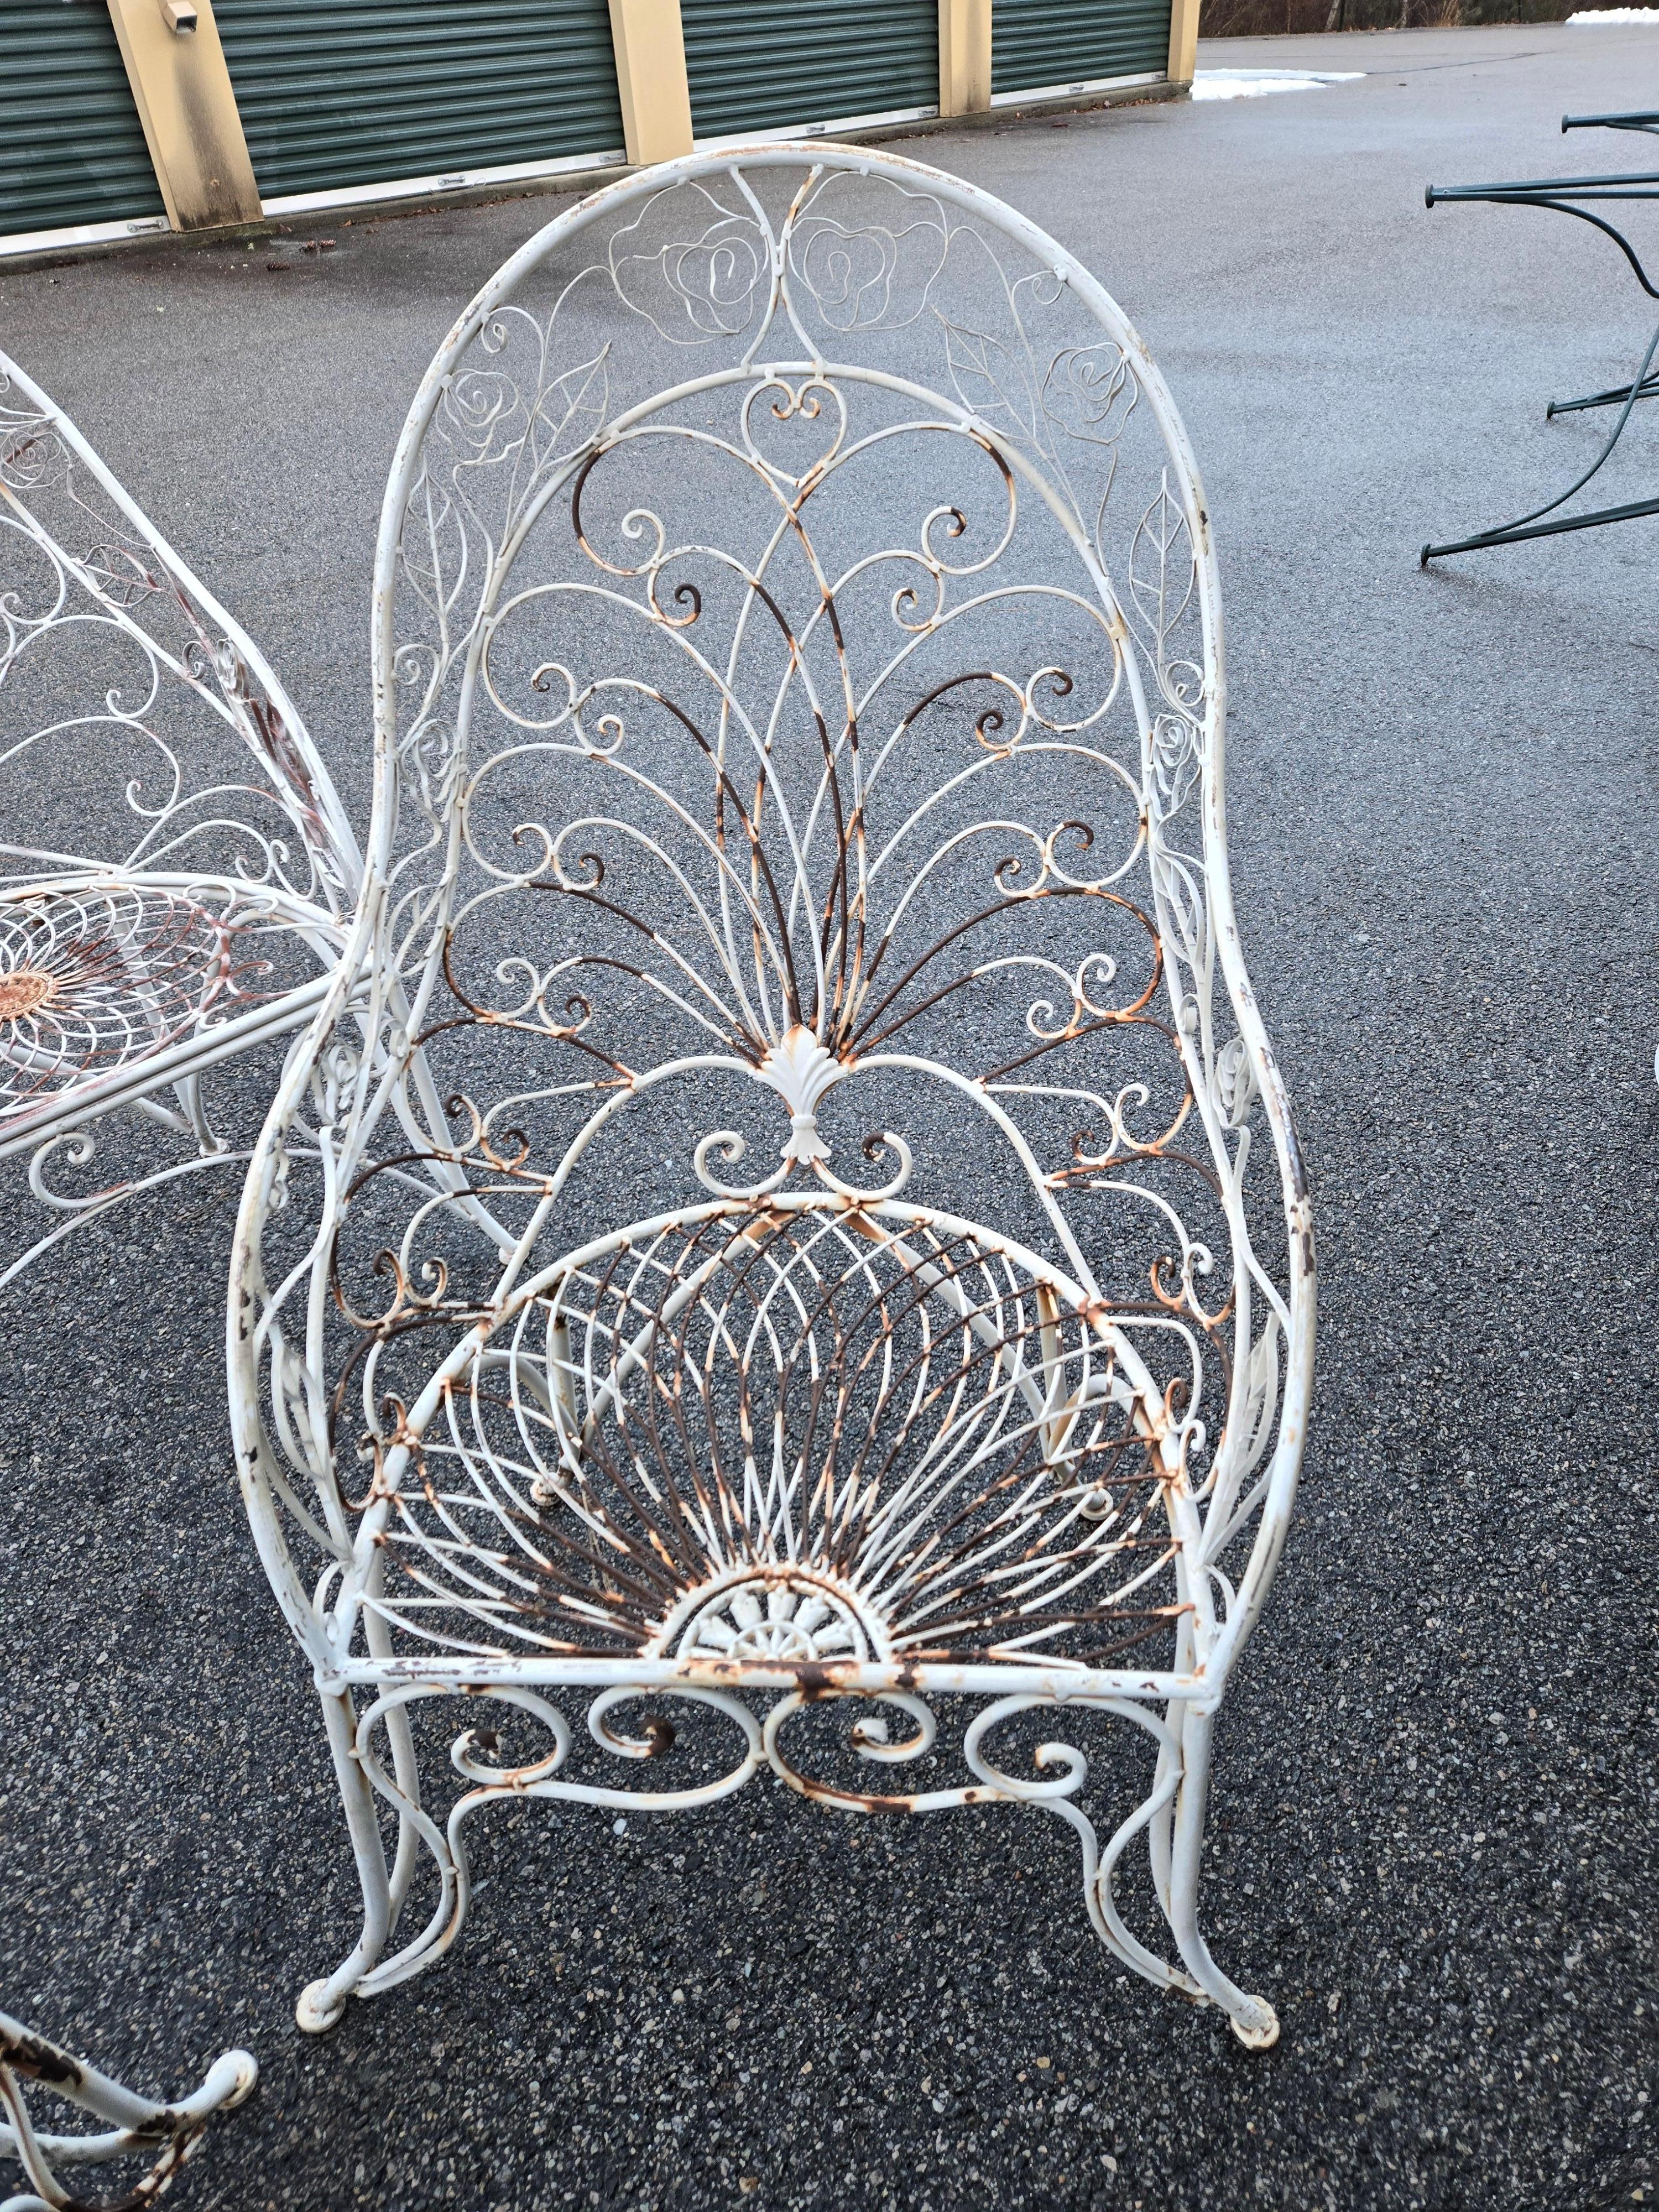 Vintage Salterini Outdoor Patio Furniture In Good Condition For Sale In Cumberland, RI